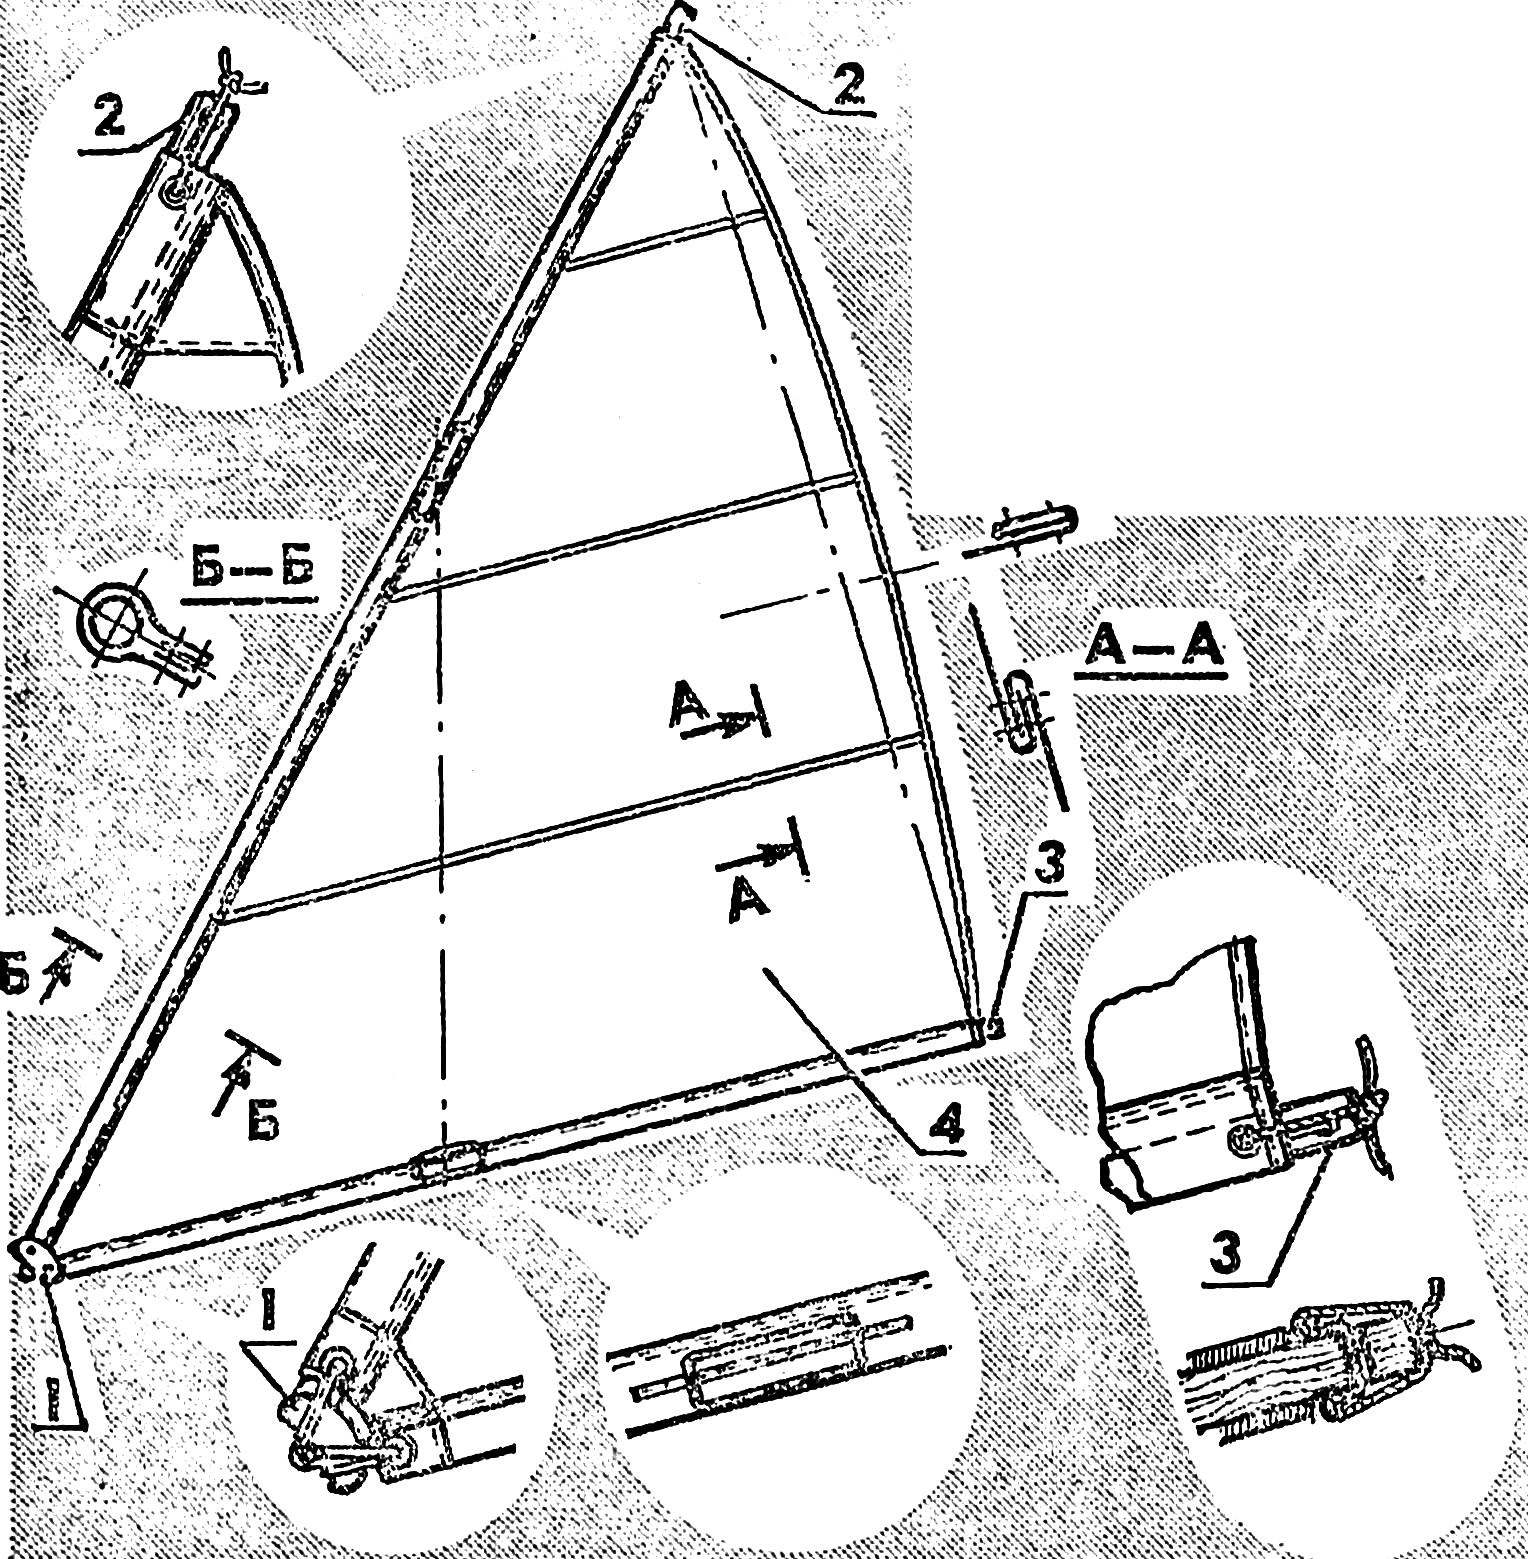 The Latin sail of the Dinghy.